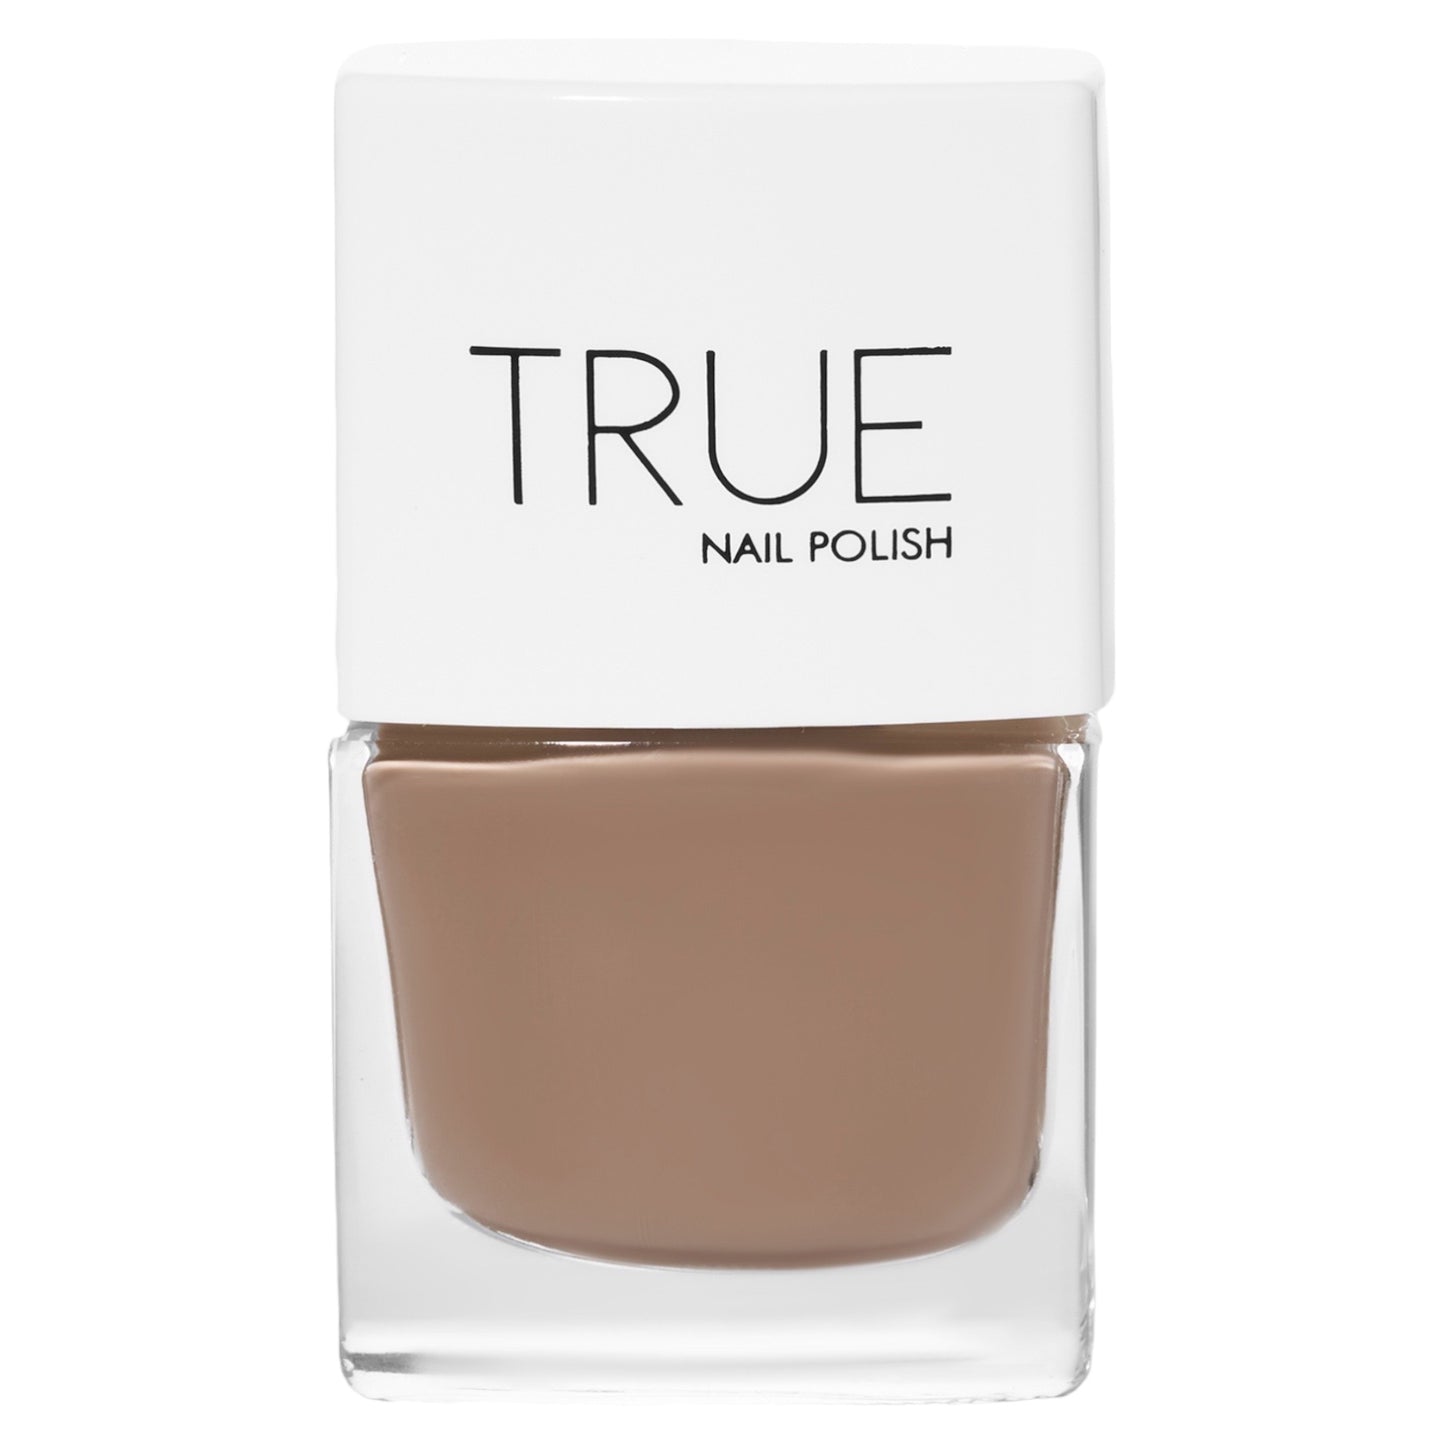 A bottle of Empathy a nude, pale brown shade shade from True Nail Polish